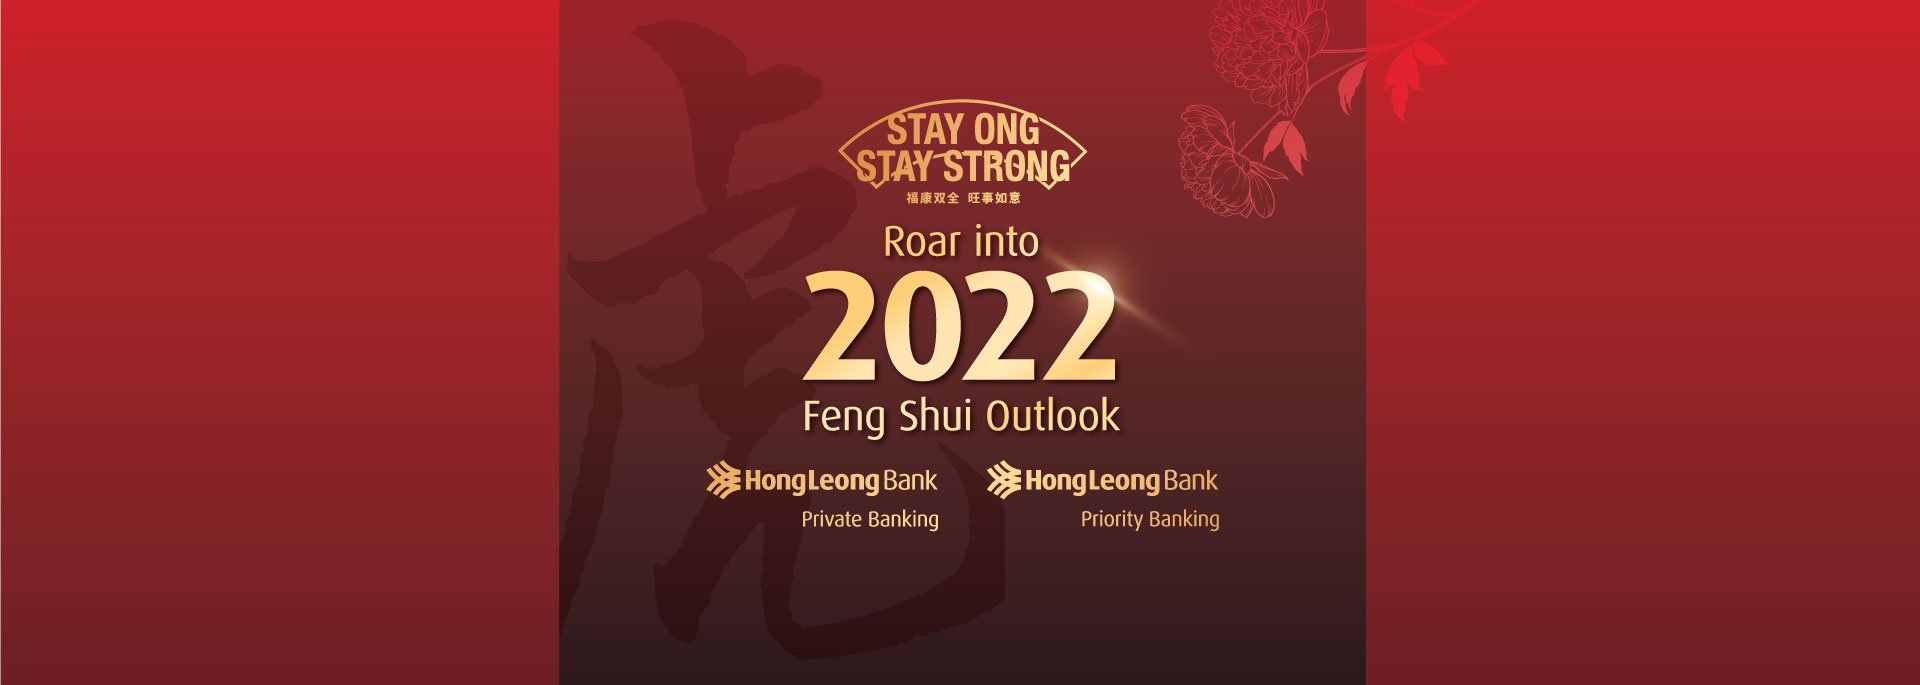 Roar Into 2022 with Dato Joey Yap